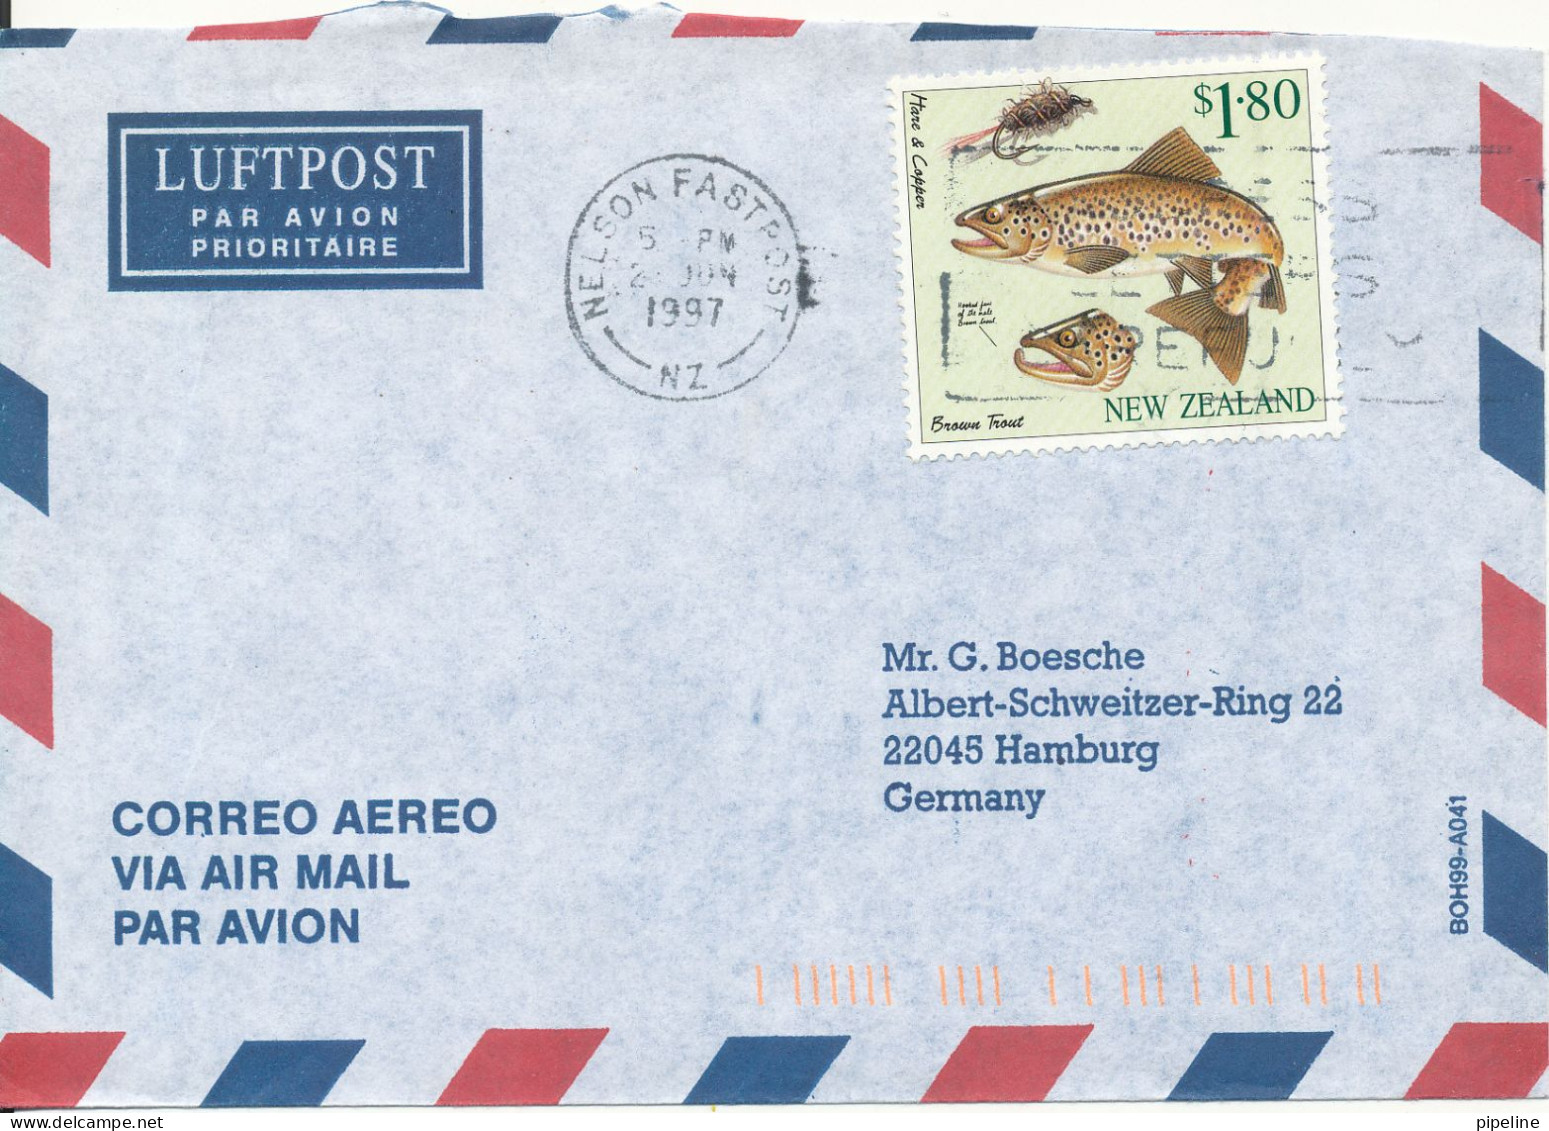 New Zealand Air Mail Cover Sent To Germany 1997 Single Franked - Luchtpost